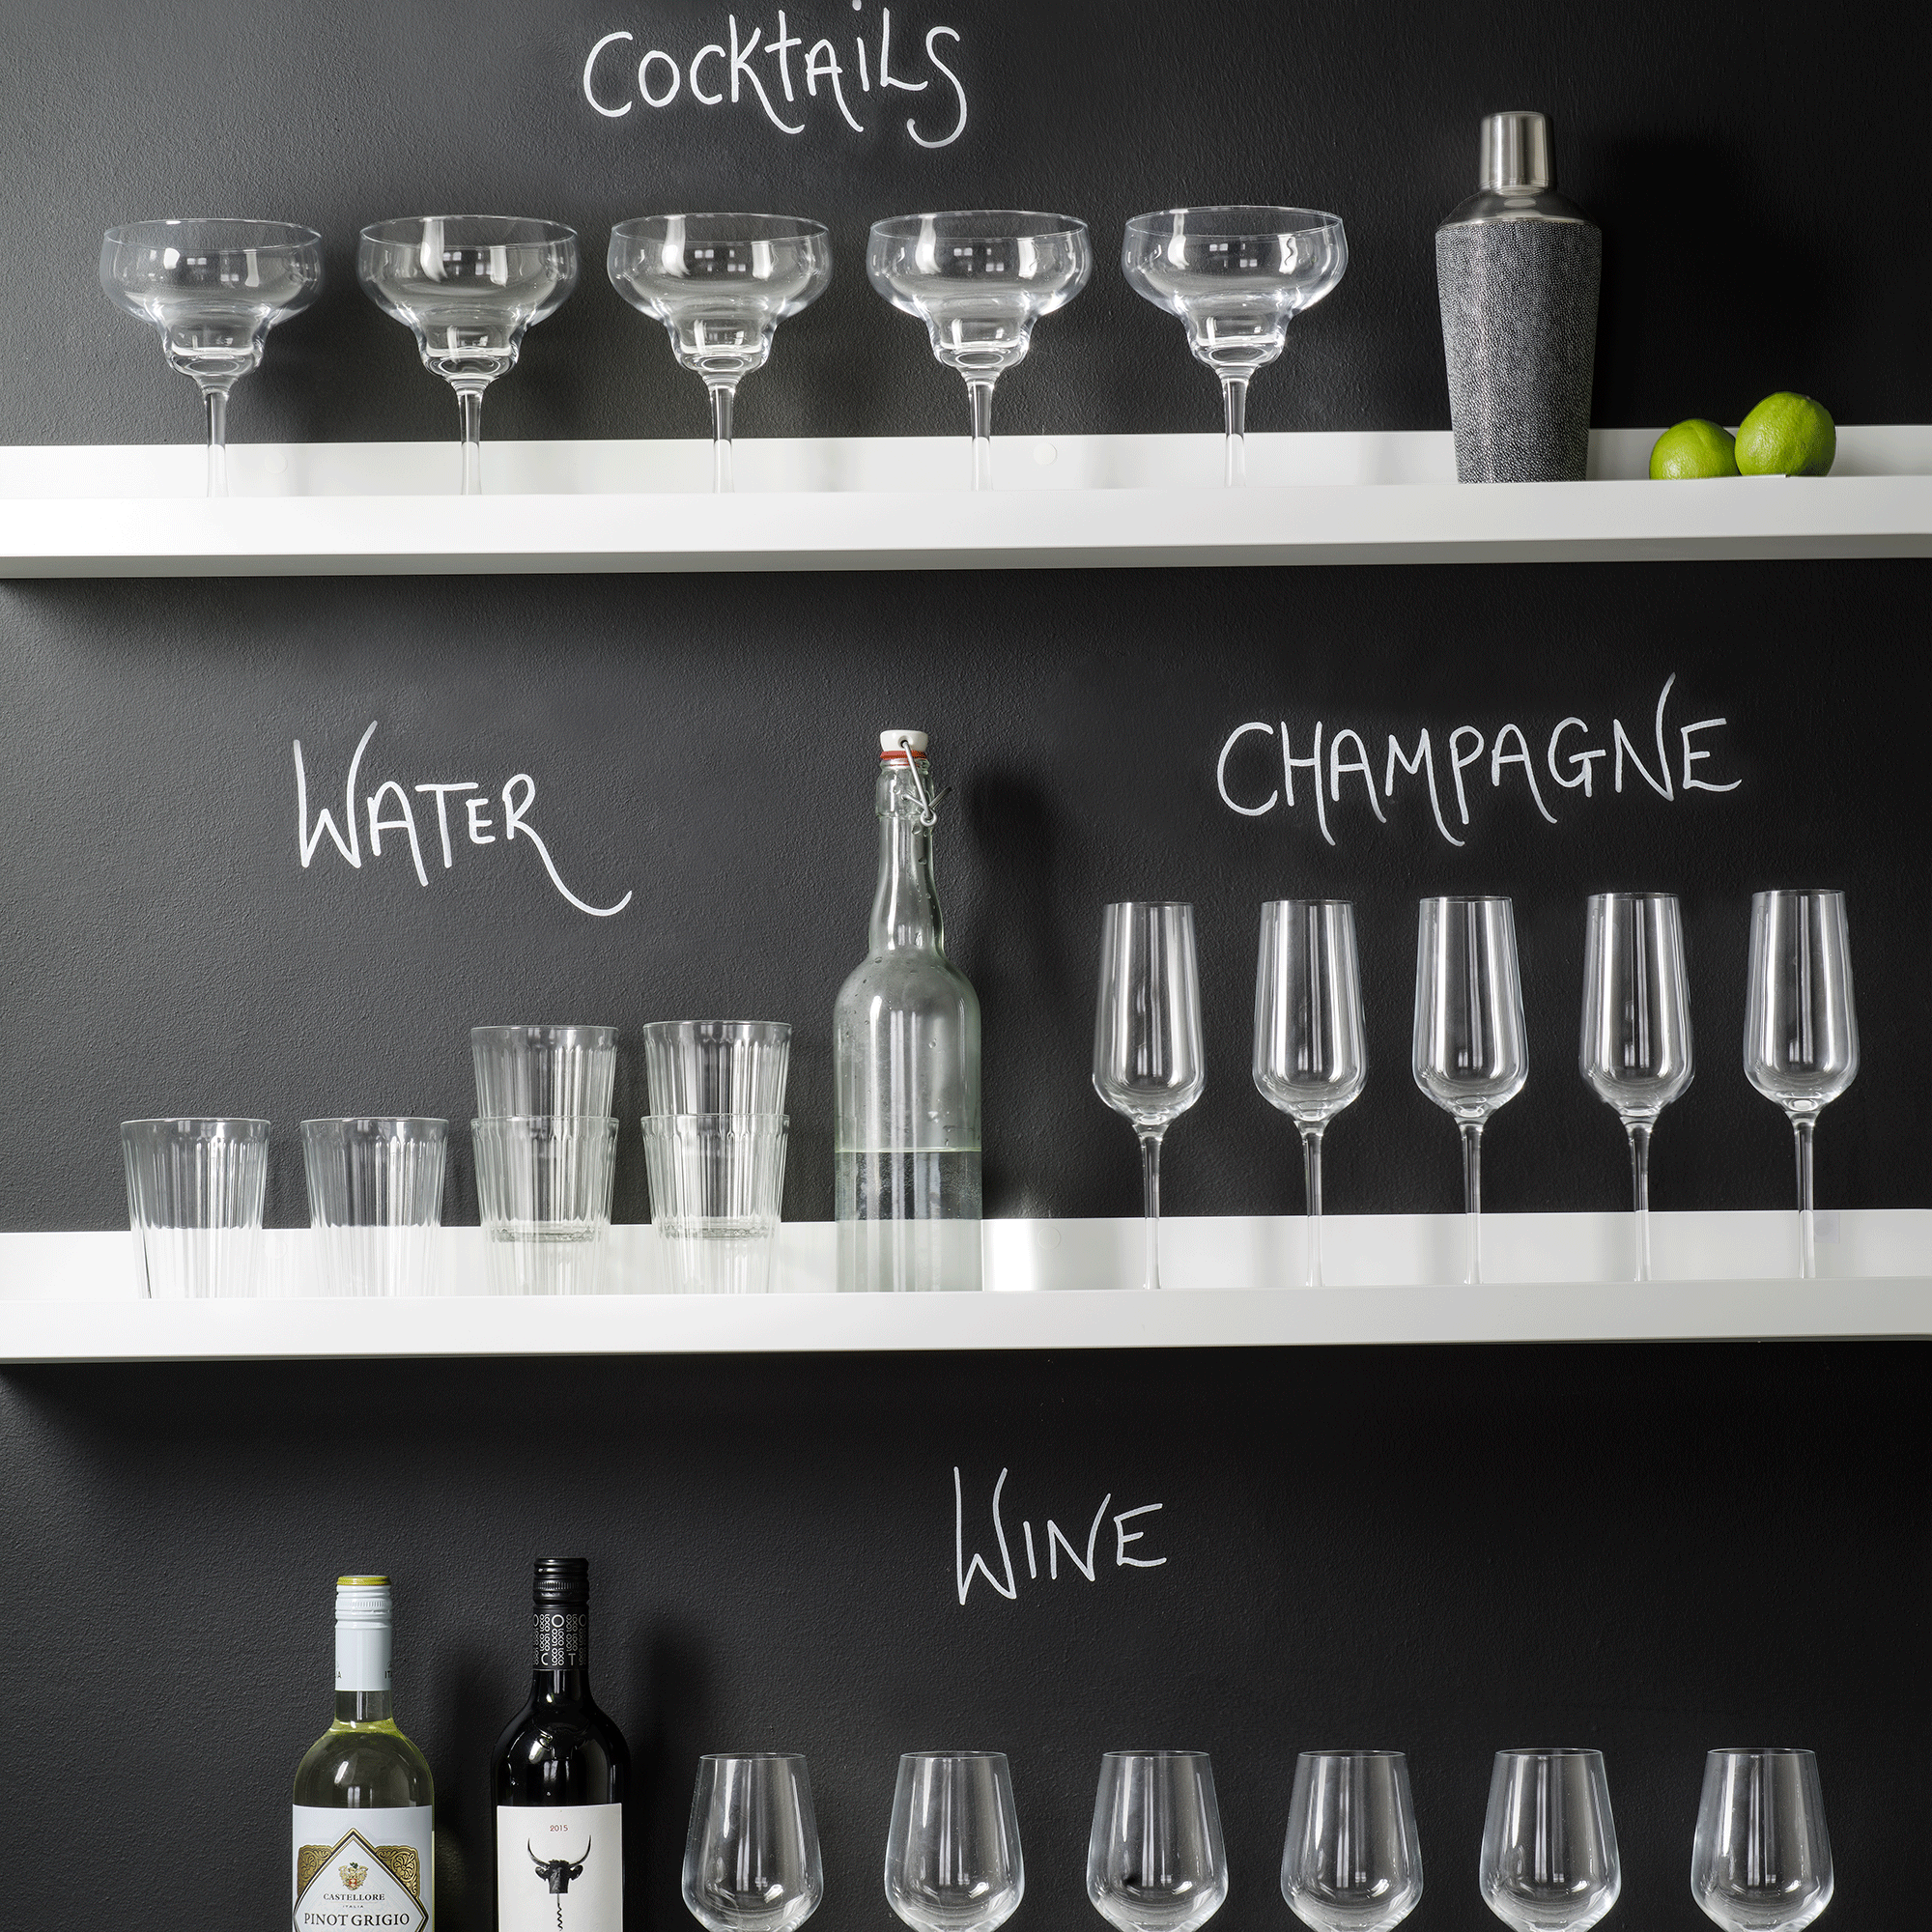 Home bar with chalkboard